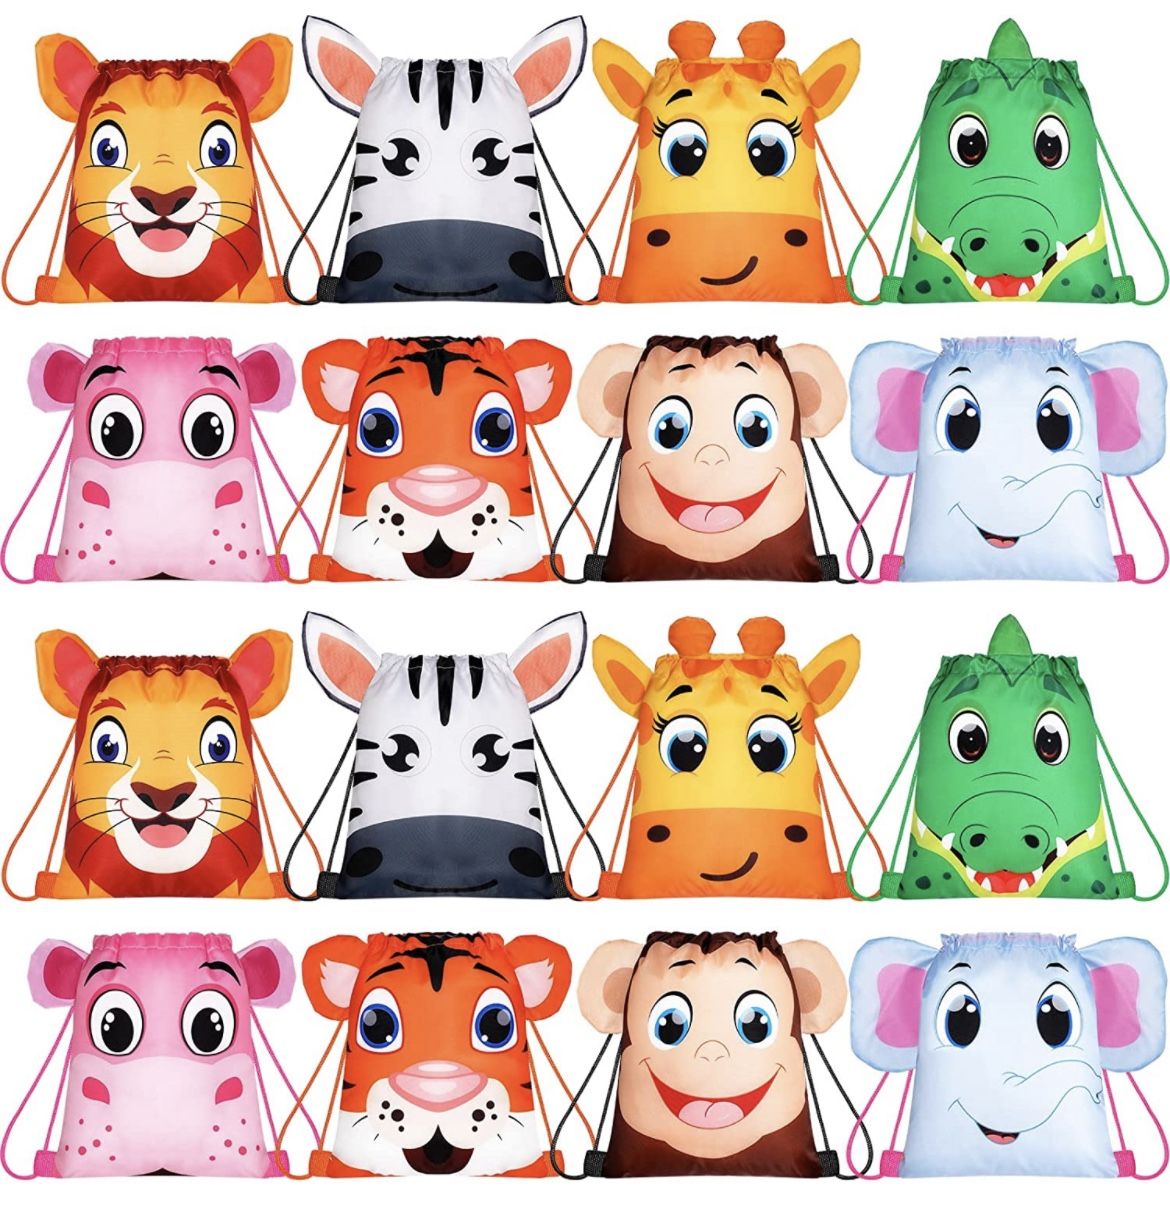 Hillban 16 Pcs Animal Drawstring Gift Bags Farm Zoo Jungle String Party Goody Bags Party Favor Bags Carton Animal Drawstring Backpack with Ear for Kid